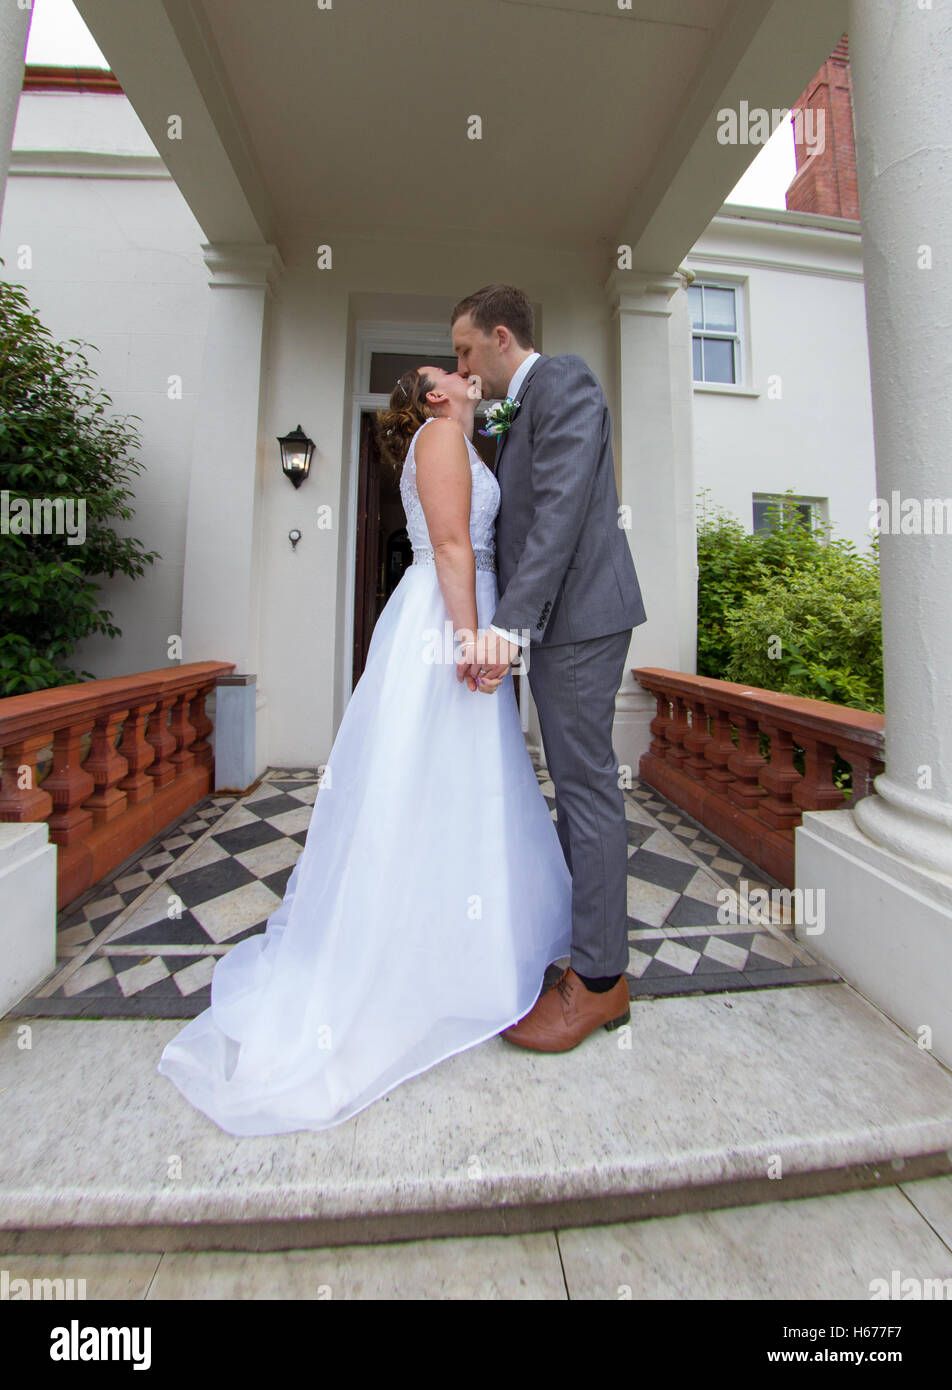 Bride and groom kissing on the steps of their wedding venue. Full length shot of the newly wed husband and wife Stock Photo